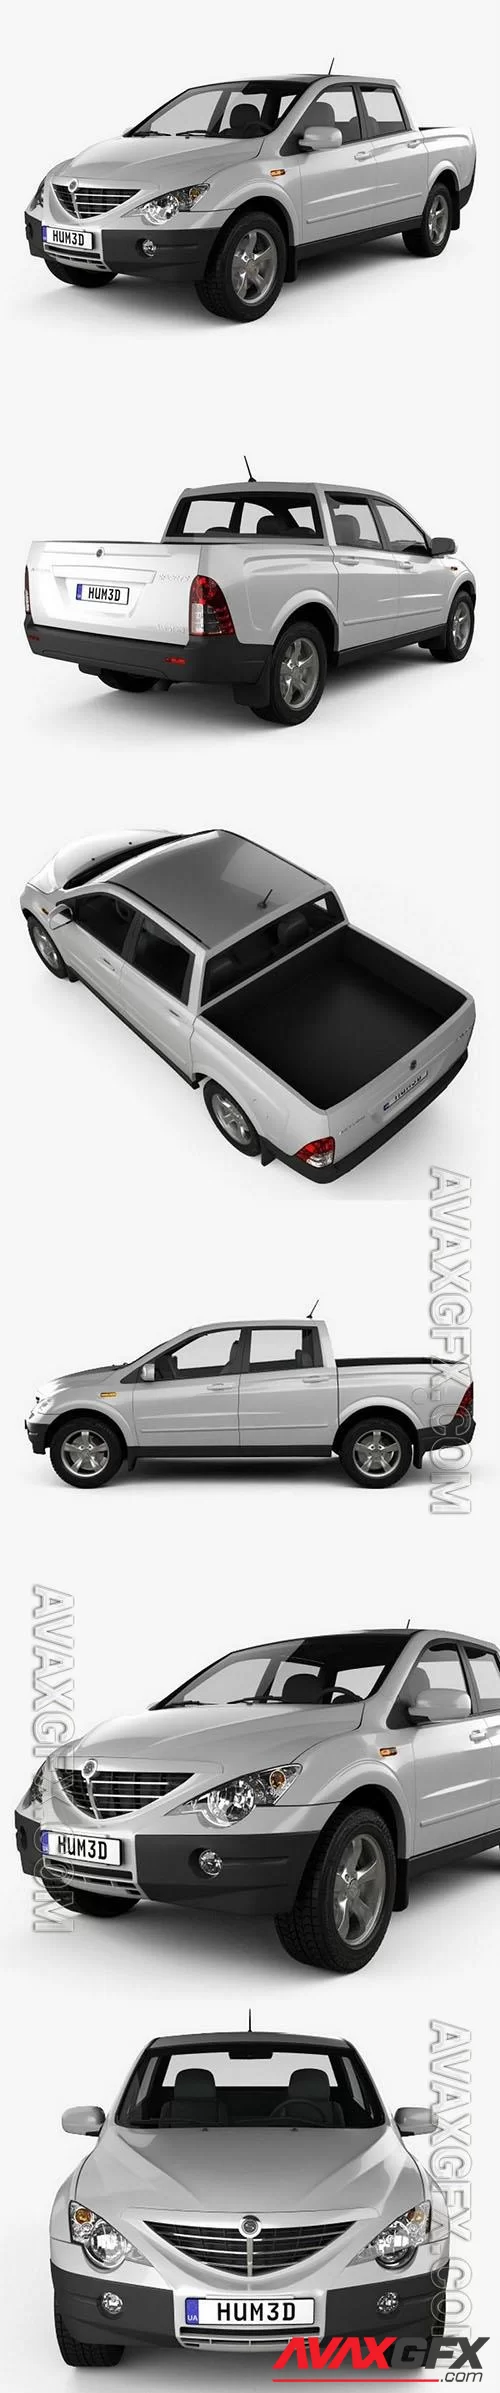 SsangYong Actyon Sports 2014 - 3d model